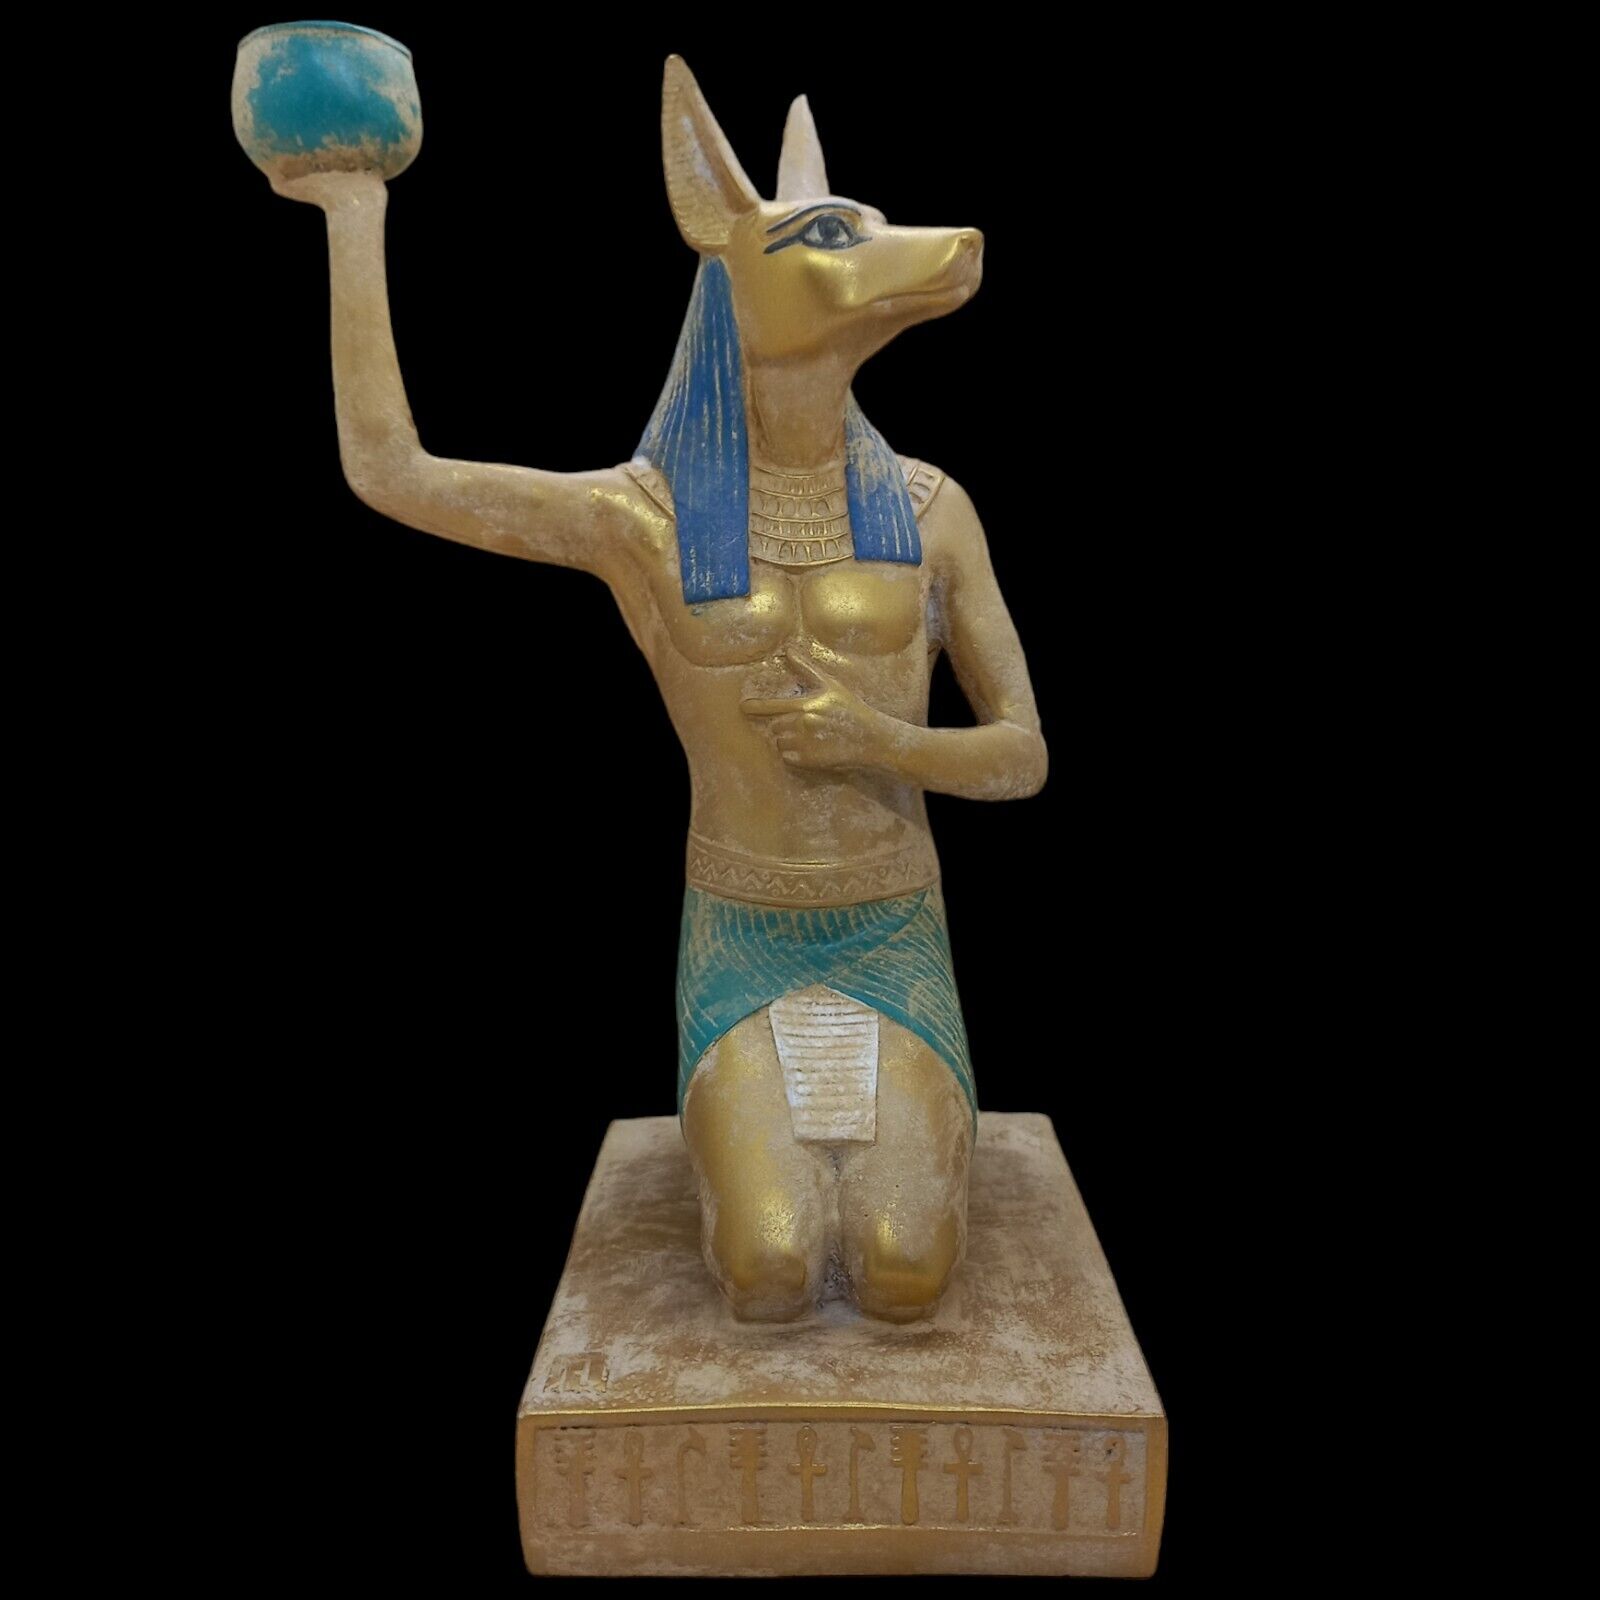 RARE ANCIENT PHARAONIC EGYPTIAN ANTIQUE ANUBIS PROTECTION GUARD STATUE